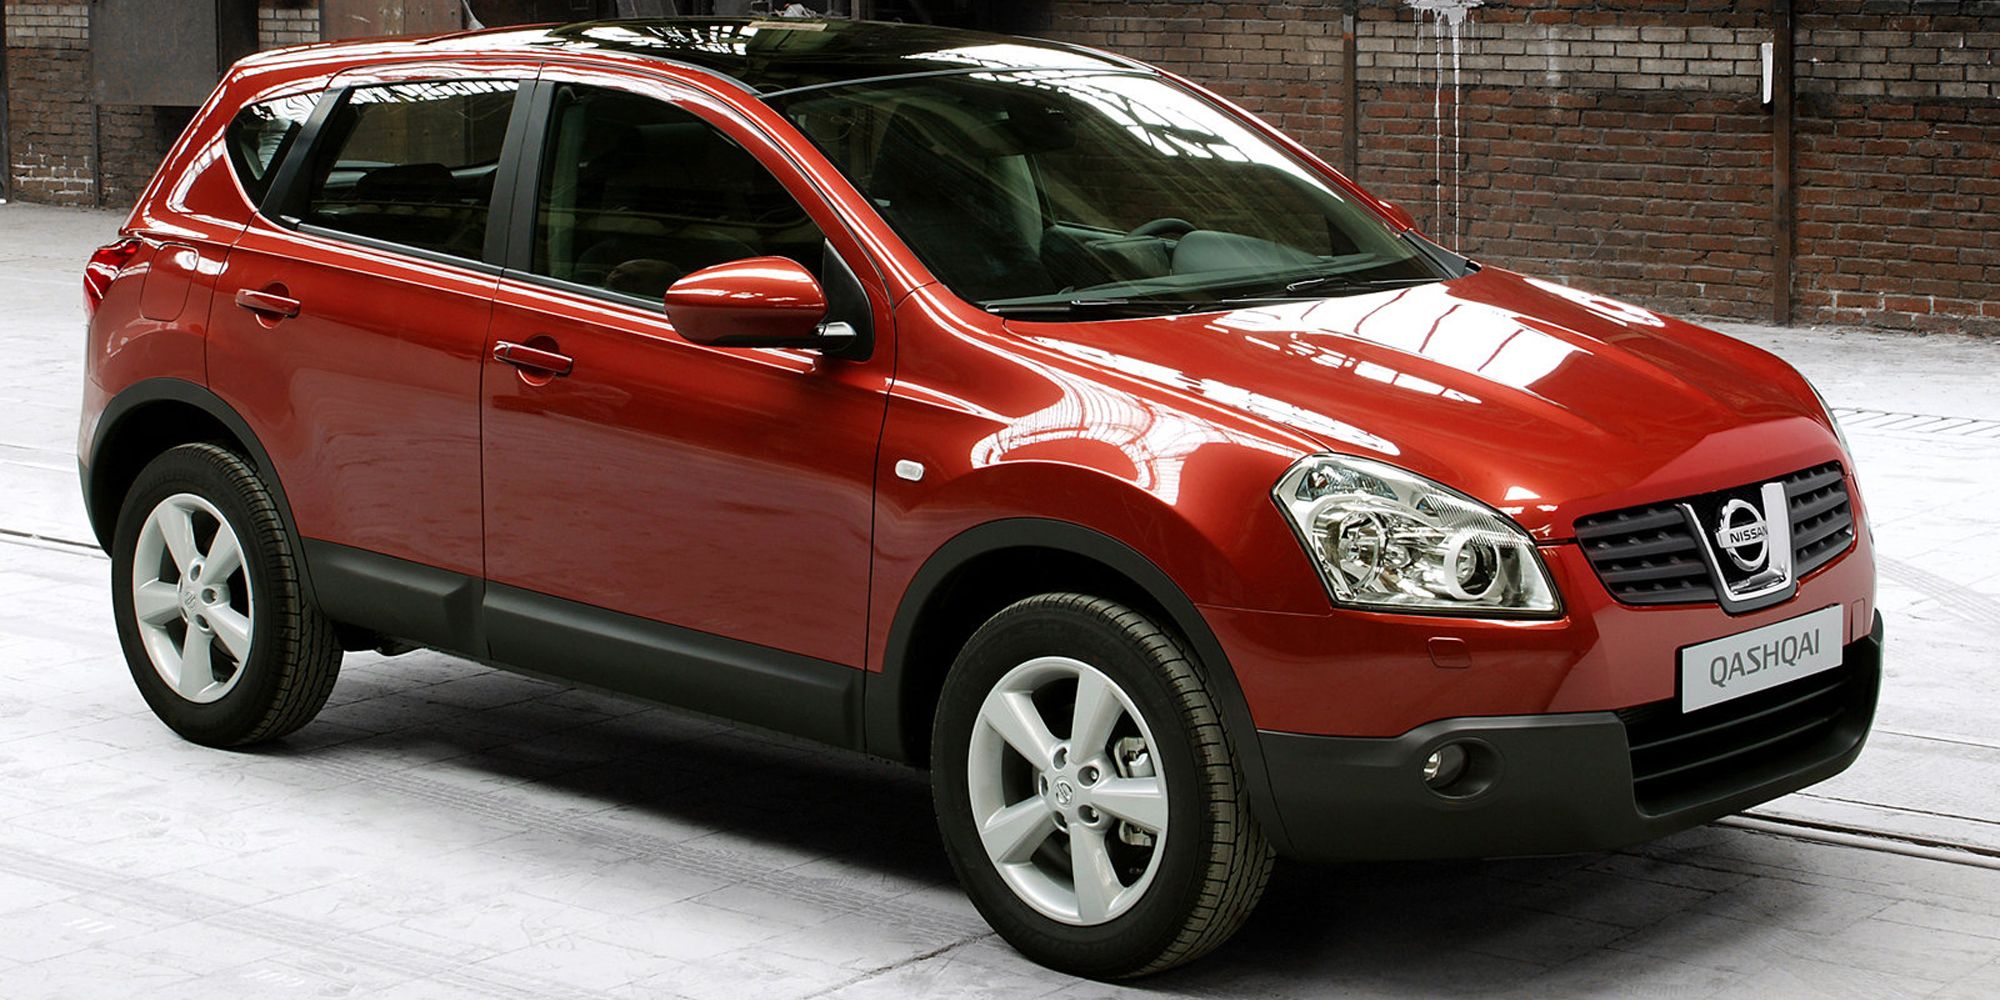 Front 3/4 view of a red Qashqai